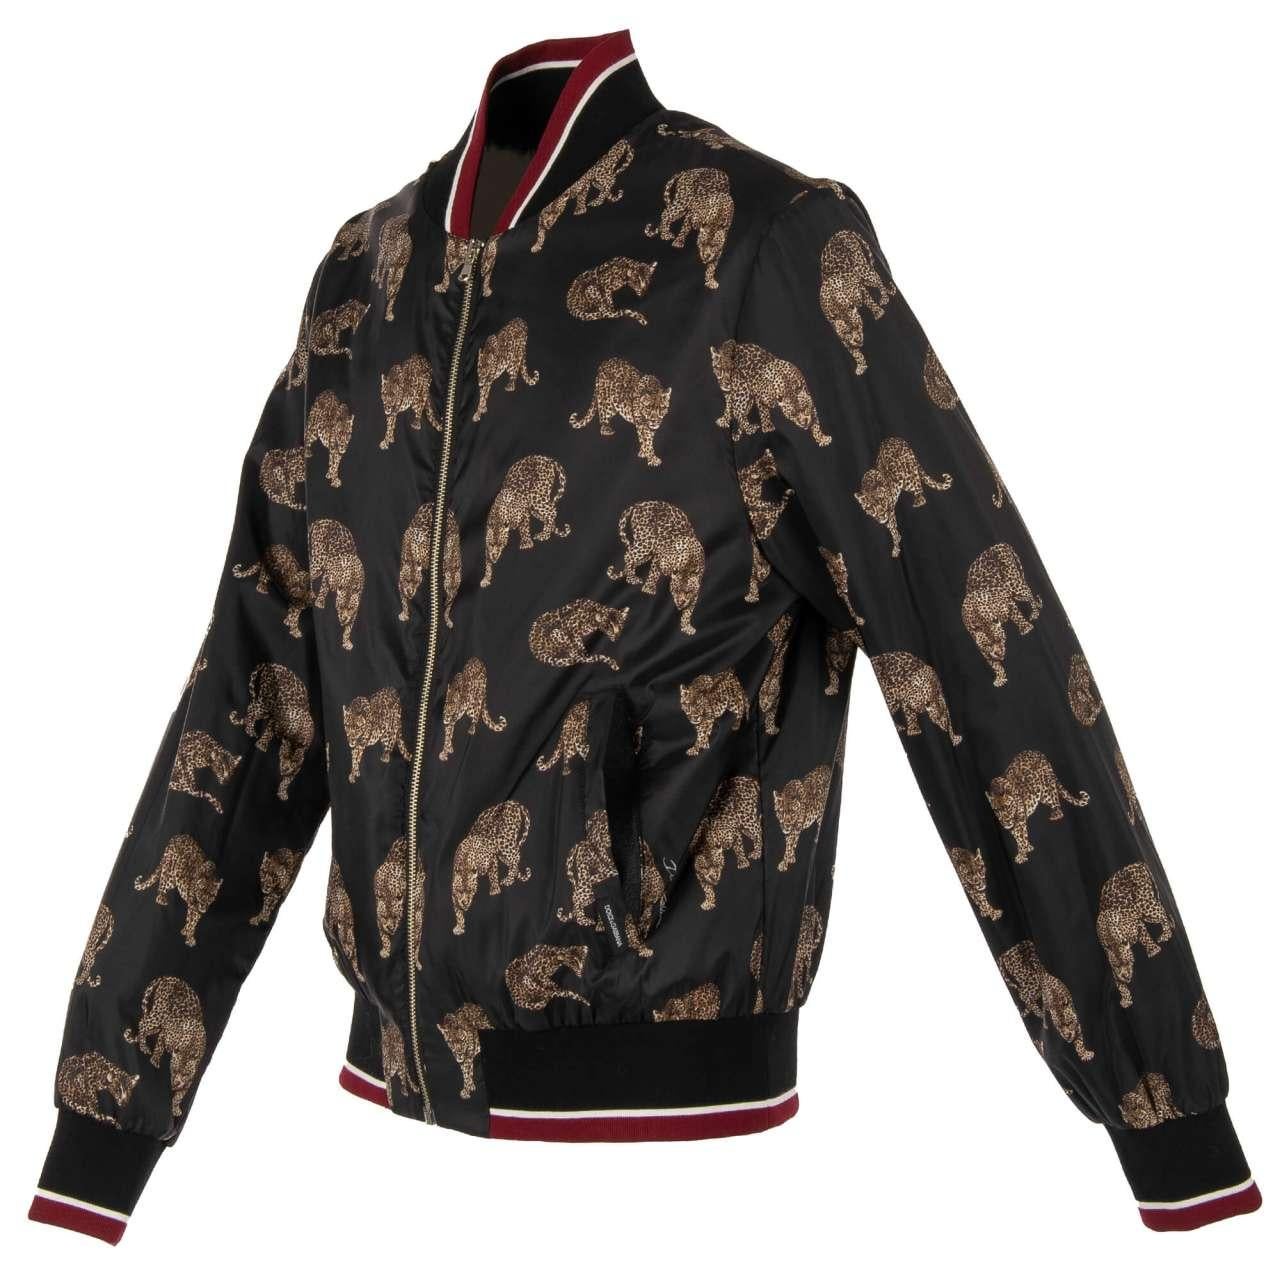 Dolce & Gabbana Leopards Printed Bomber Jacket with Pockets Black Brown 56 In Excellent Condition For Sale In Erkrath, DE